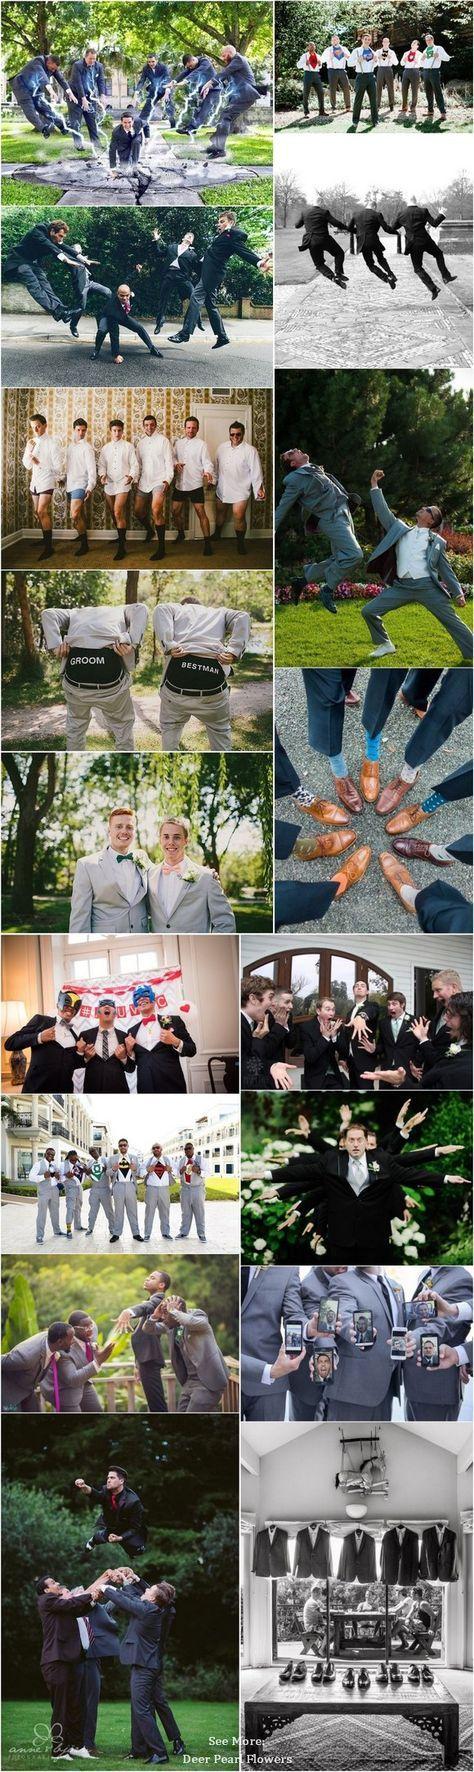 Wedding - 30 Fun Groomsmen Photo Ideas And Poses You Have To Try